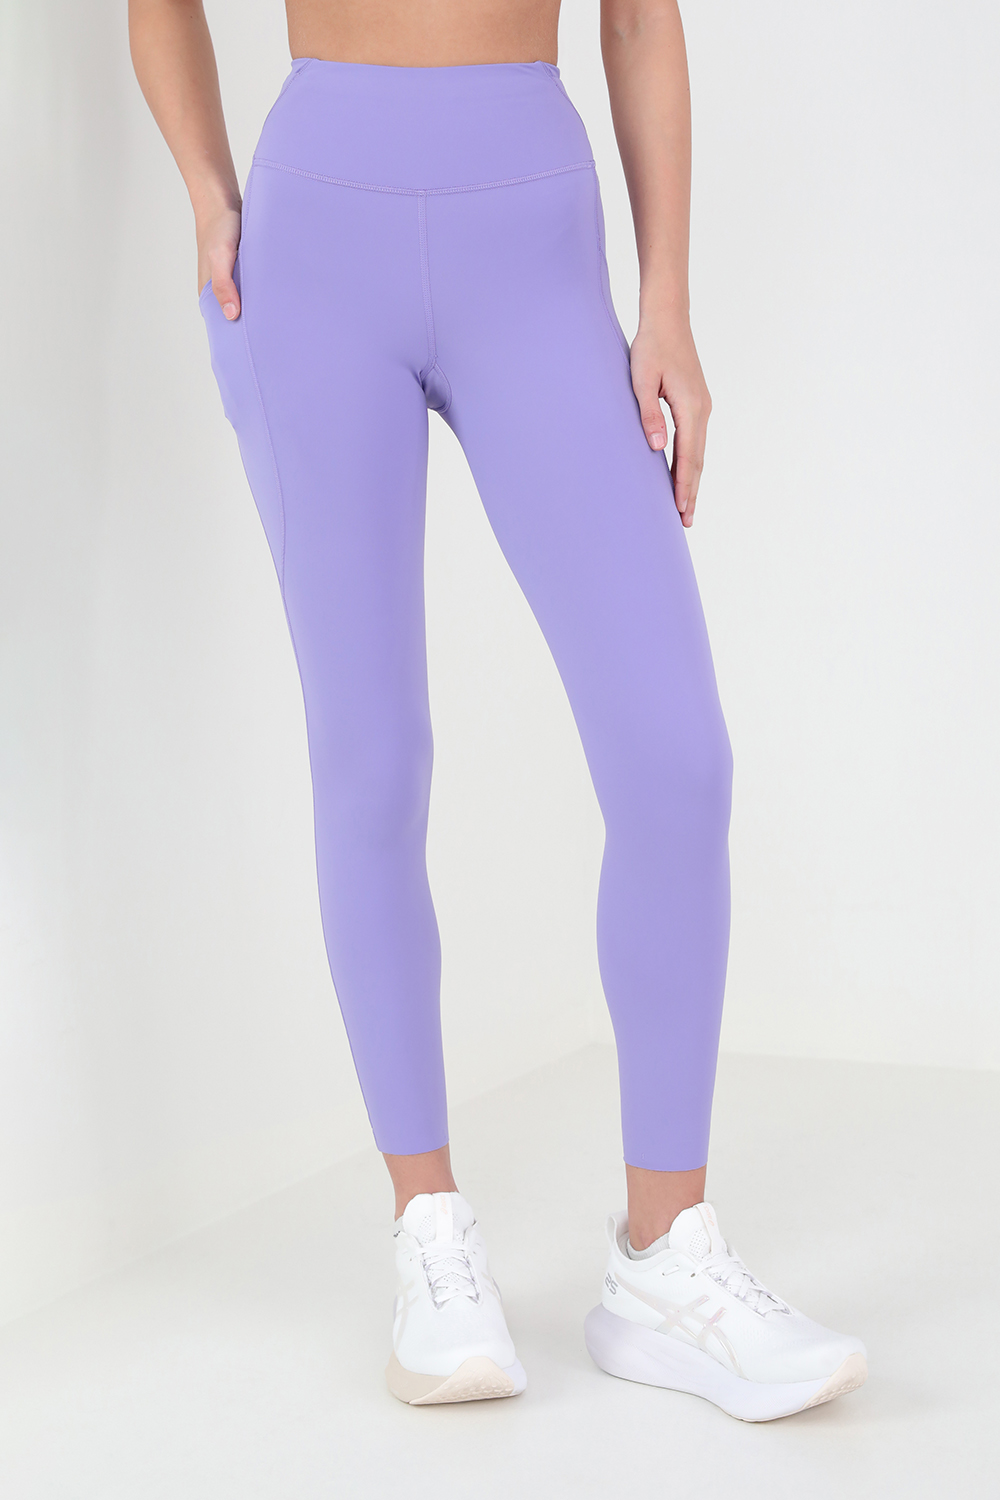 Fast and Free HR Tight 25" LULULEMON